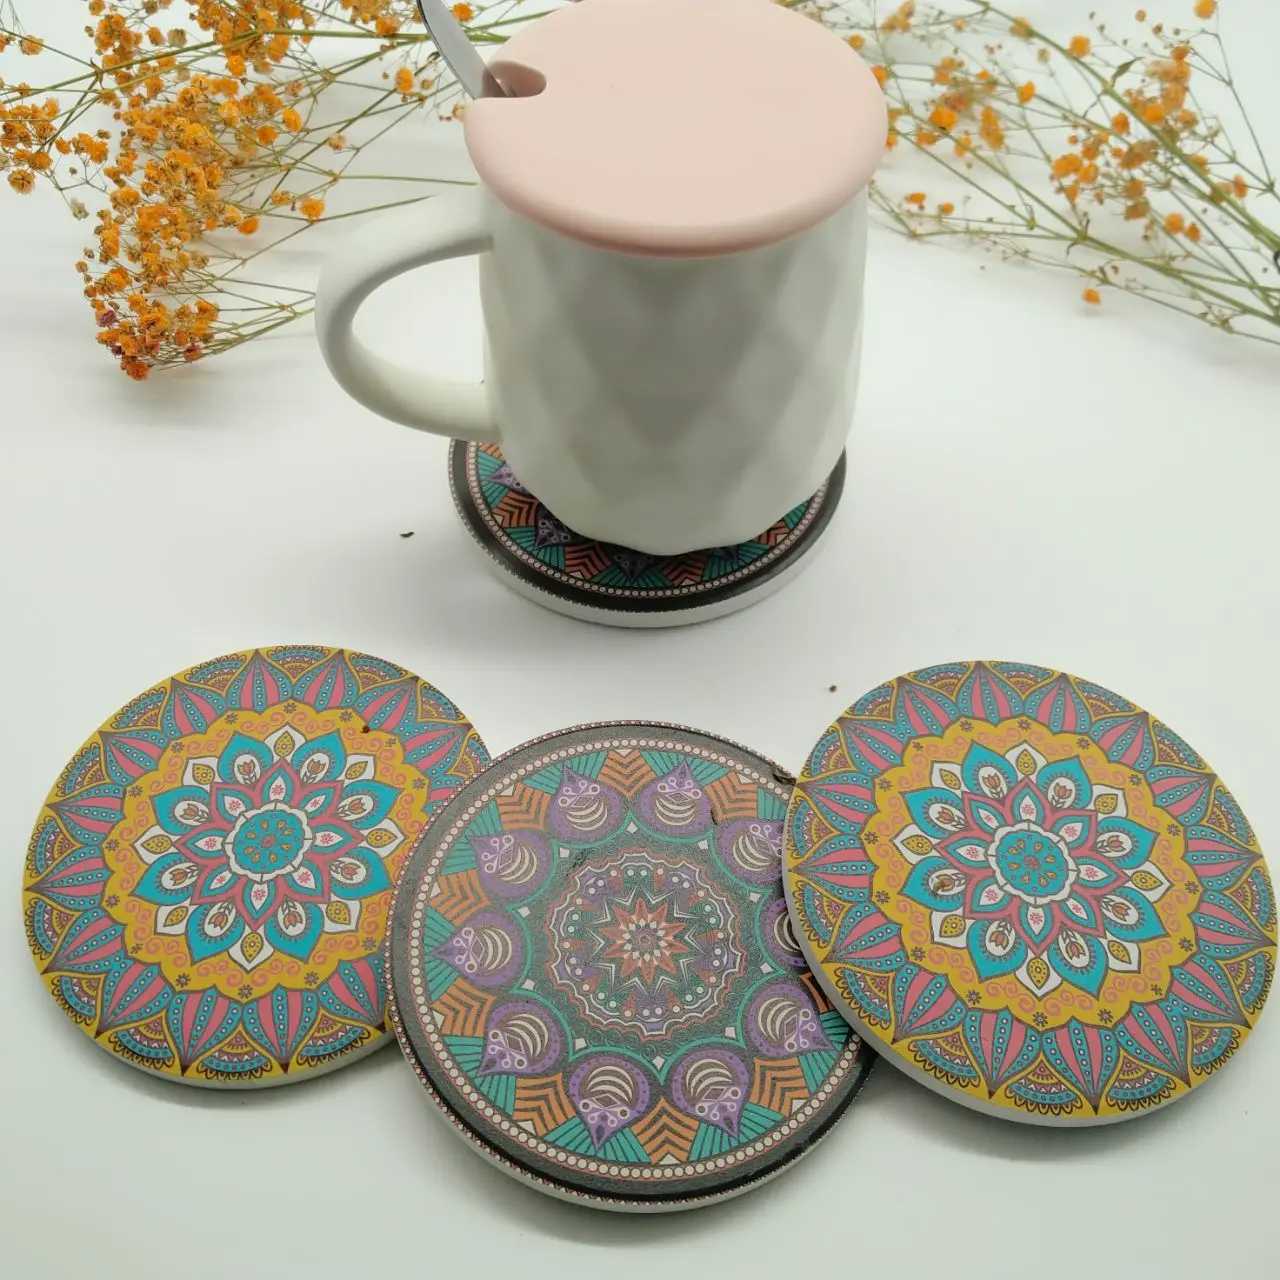 

Jiayi Drinks Absorbent Stone Coaster Set with Ceramic Stone and Cork Base for Kinds of Mugs, Cmyk